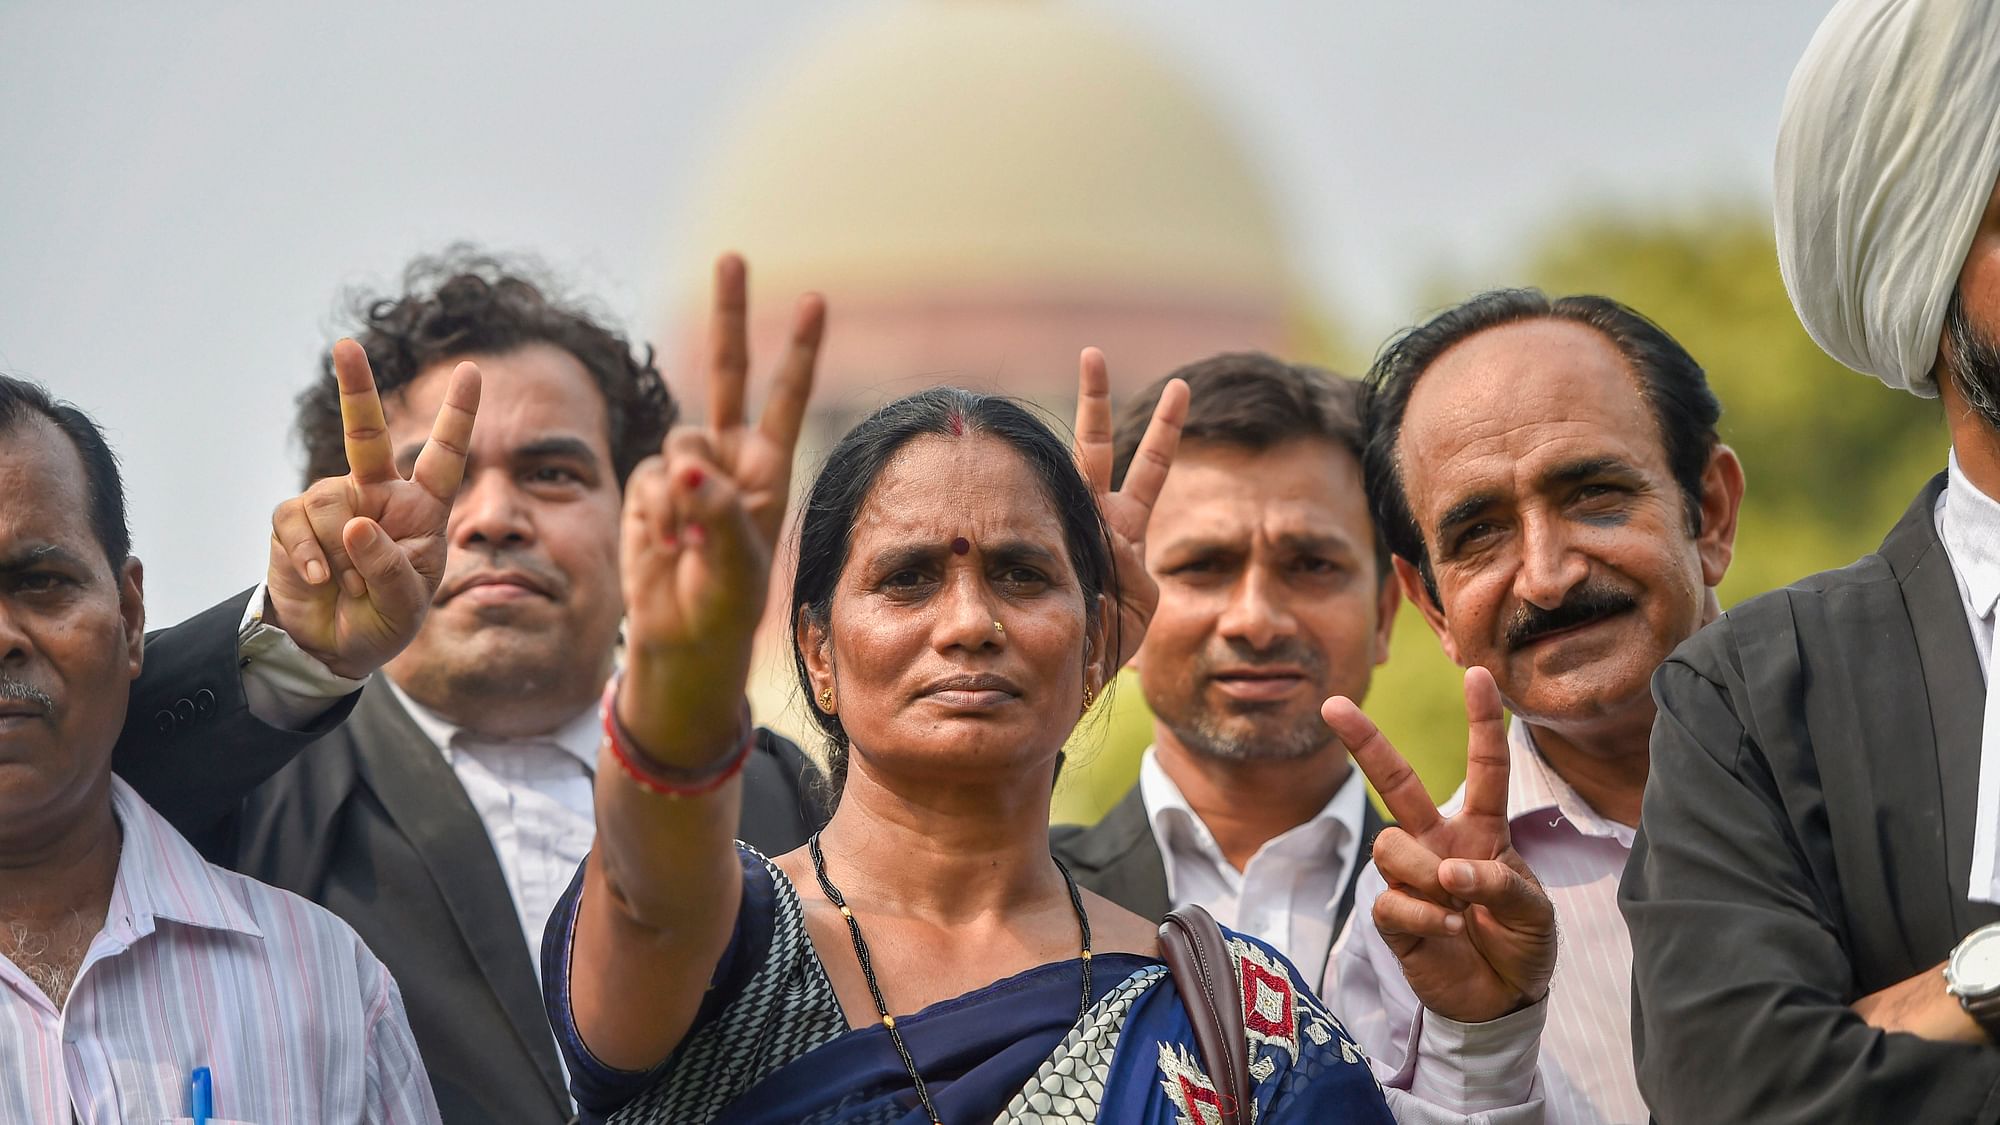 Nirbhayas parents show the victory sign after the Supreme Court verdict on the December 2012 gang rape case, in New Delhi on 9 July.